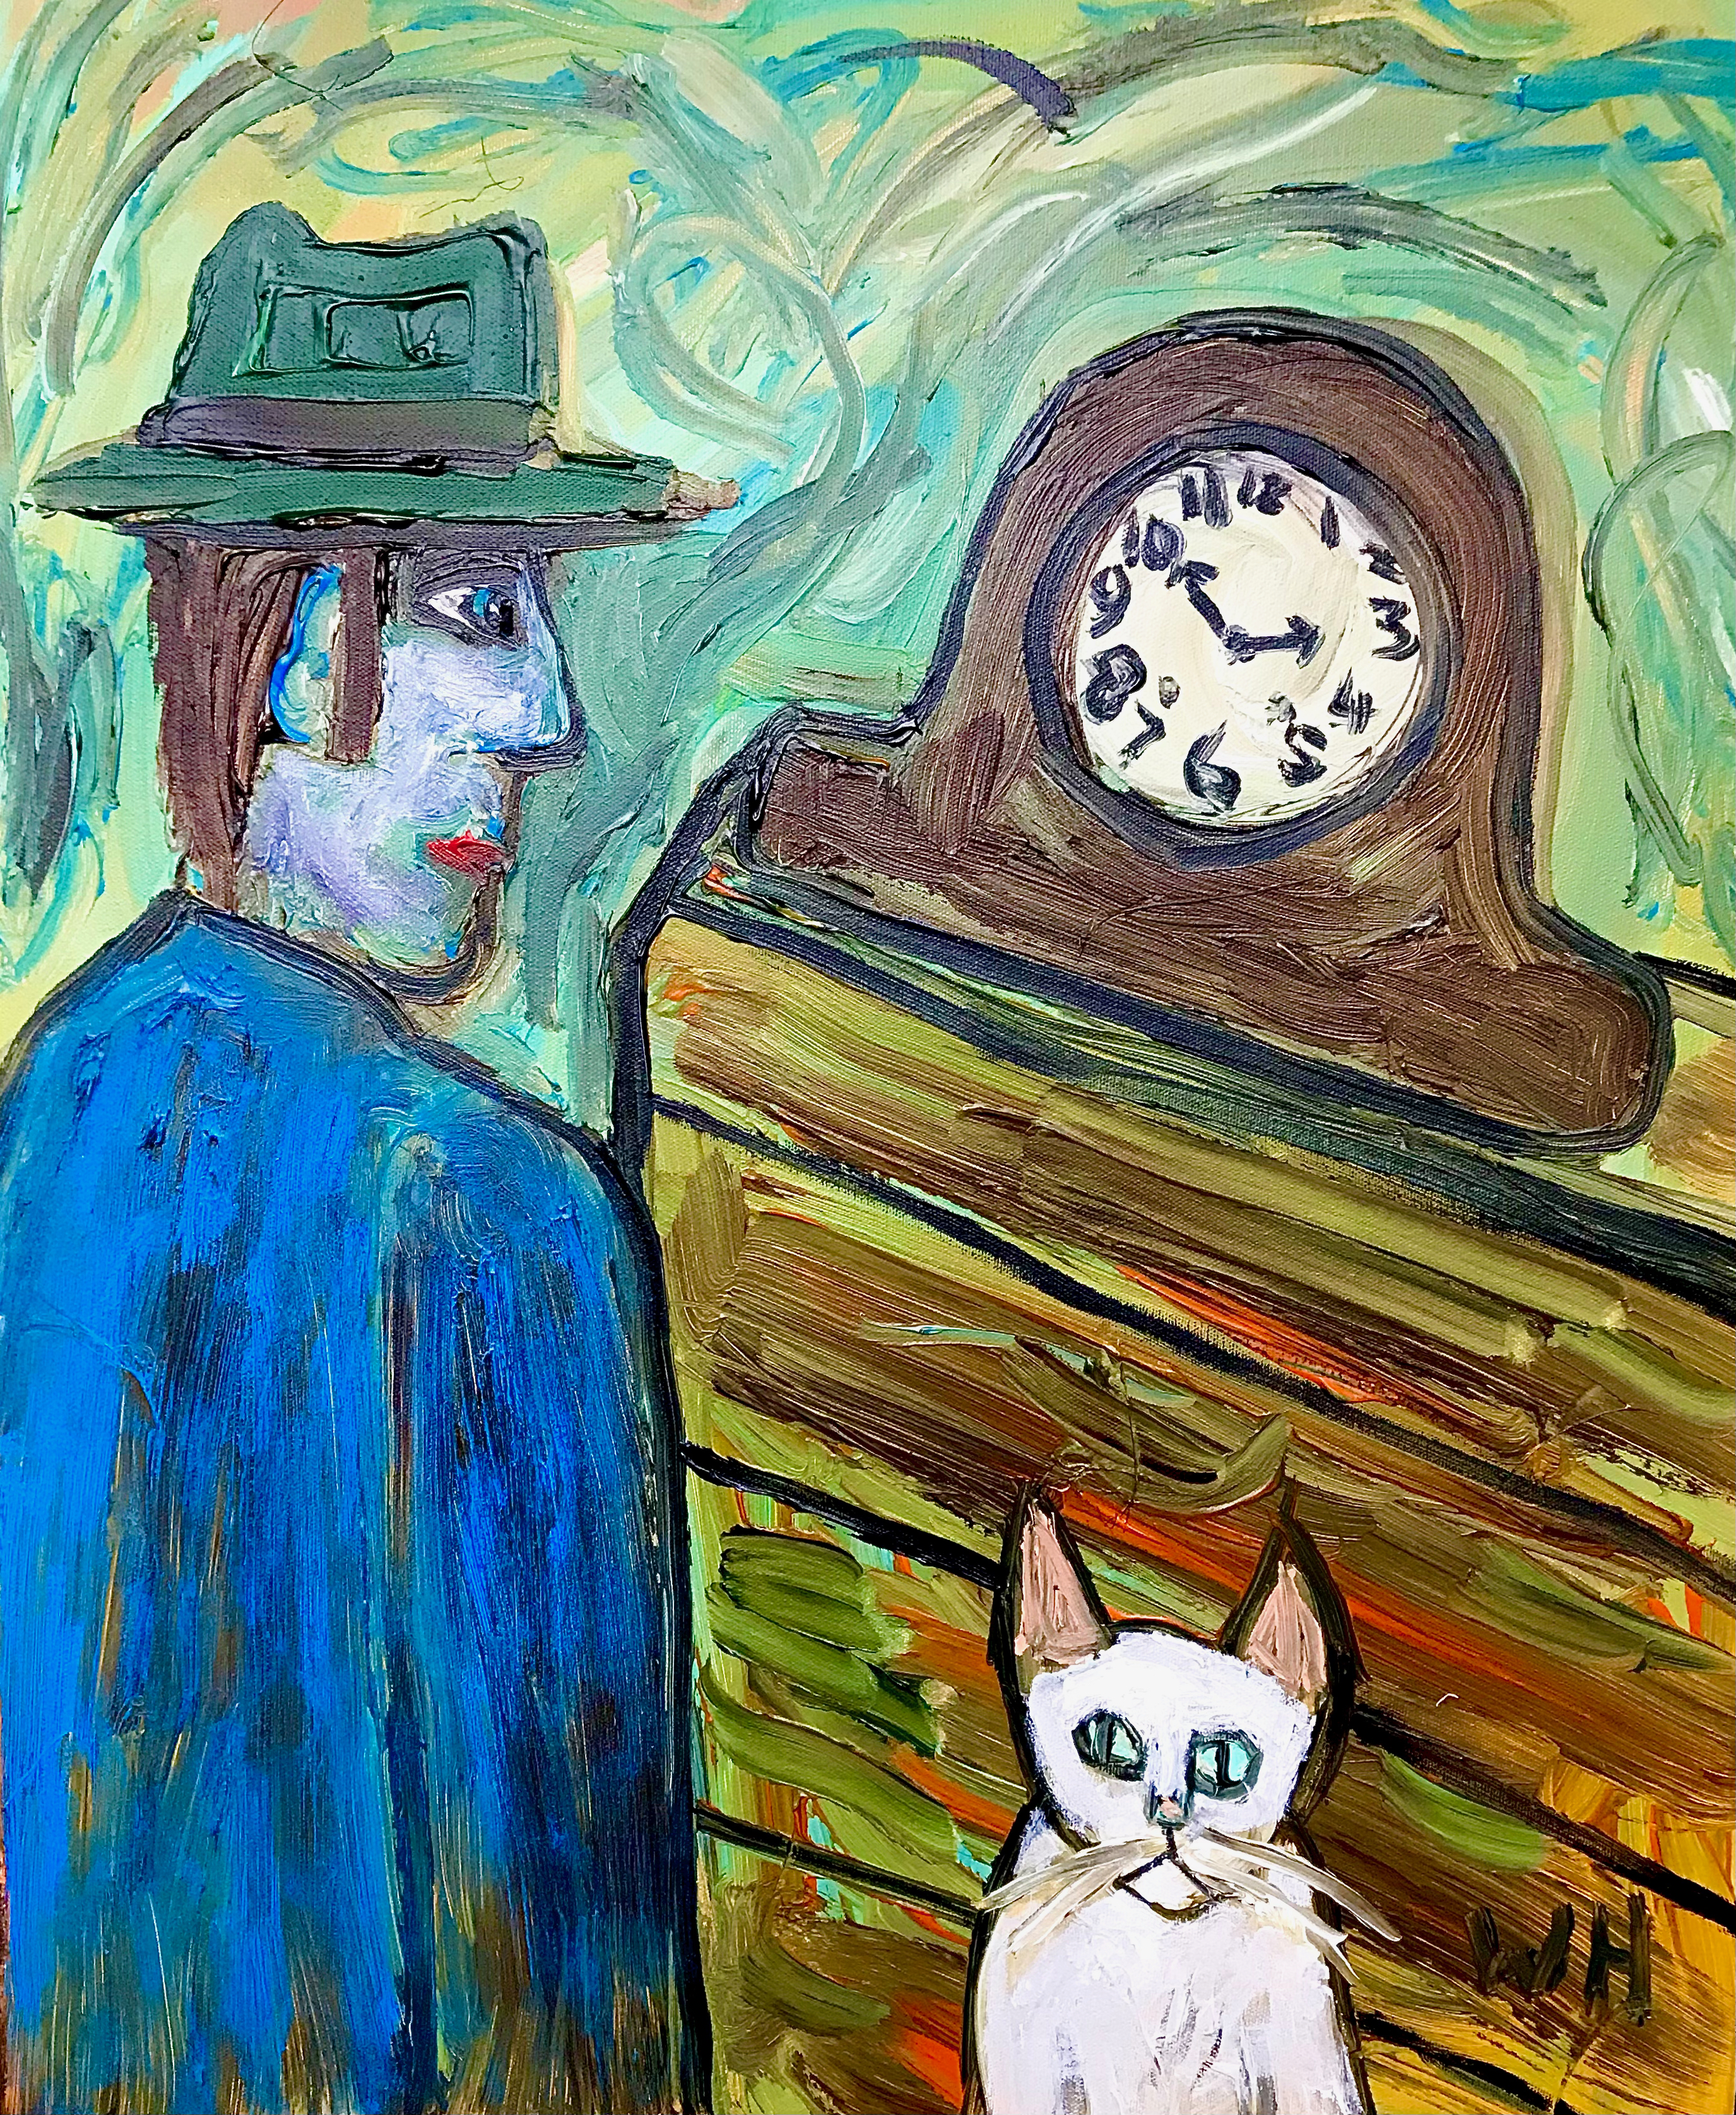 Man looking at clock (with cat thrown in).